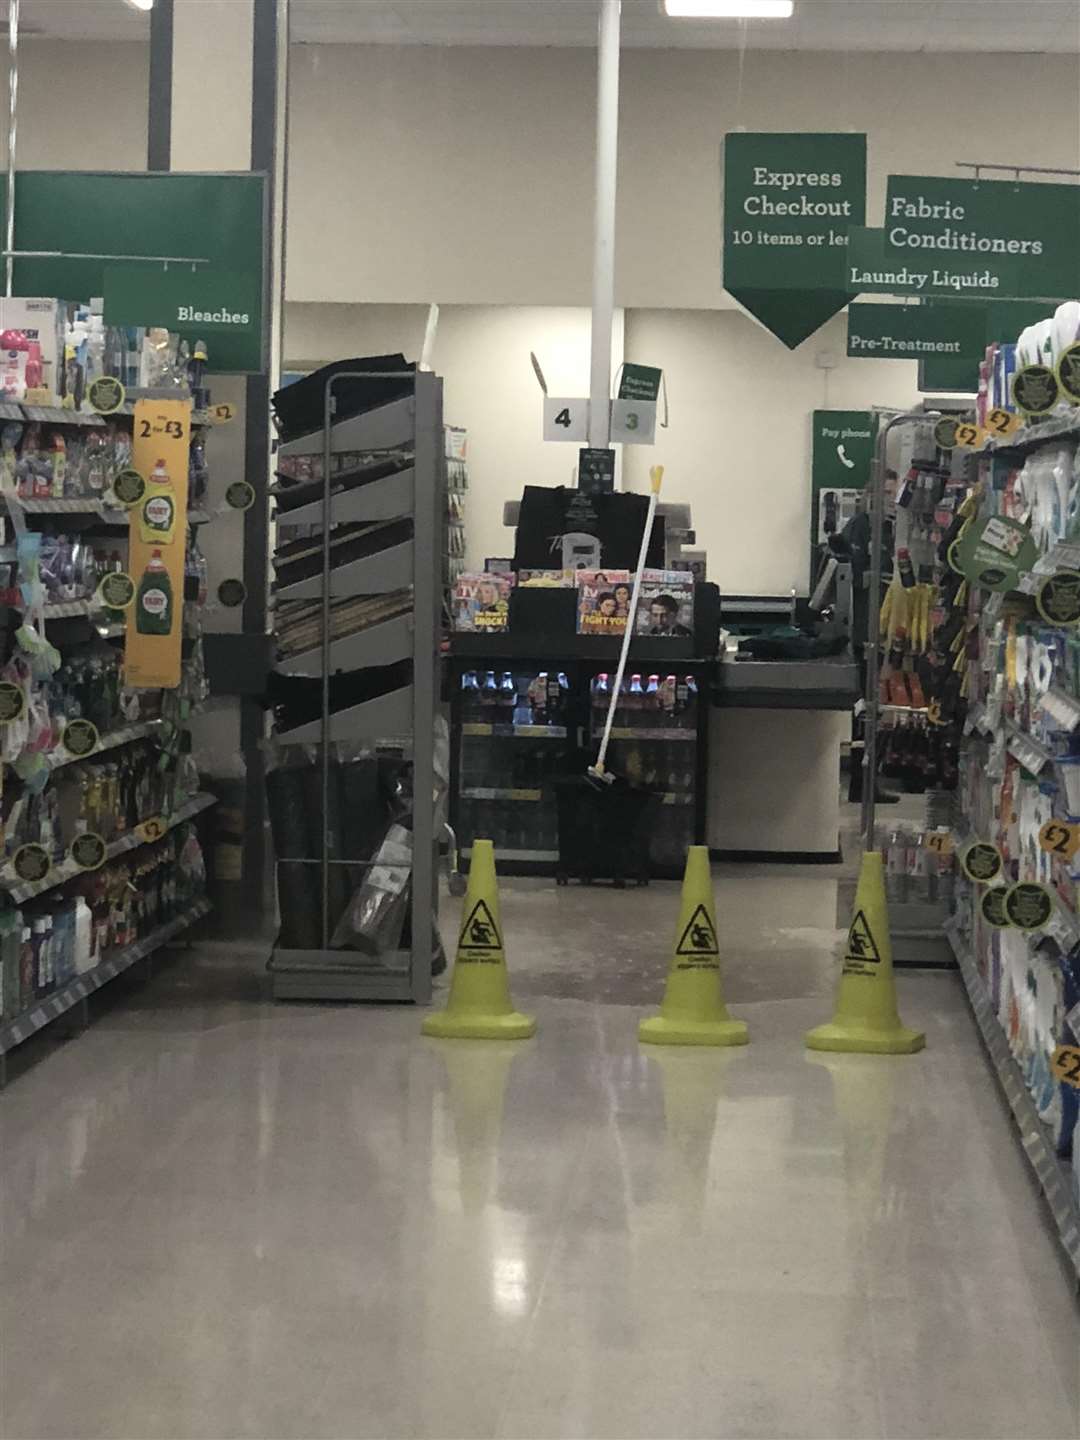 Morrison's roof leaked this morning, forcing it to close (2252497)